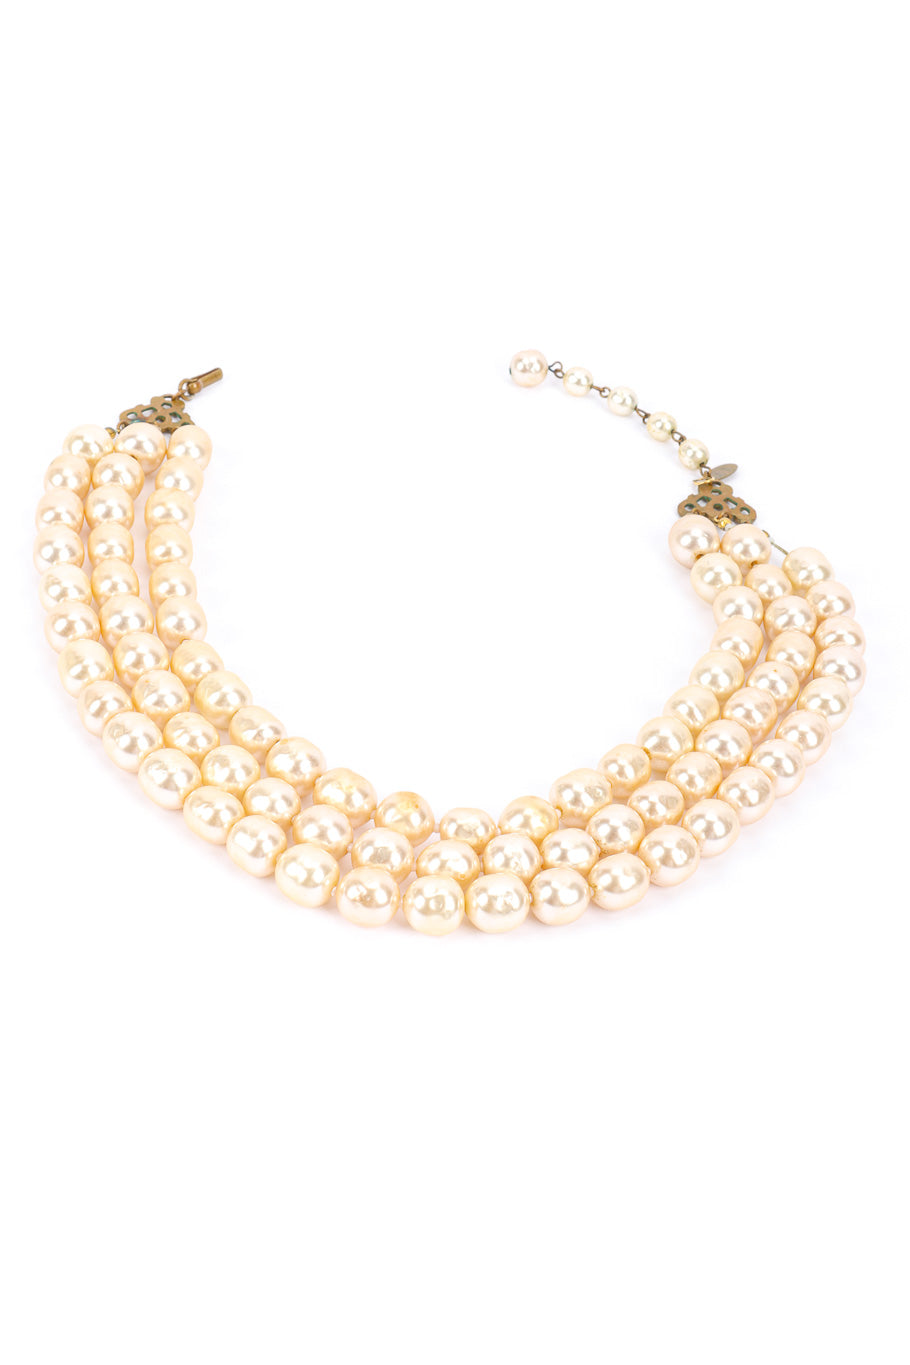 Vintage Miriam Haskell 3-Strand Pearl Collar Necklace full view @recessla